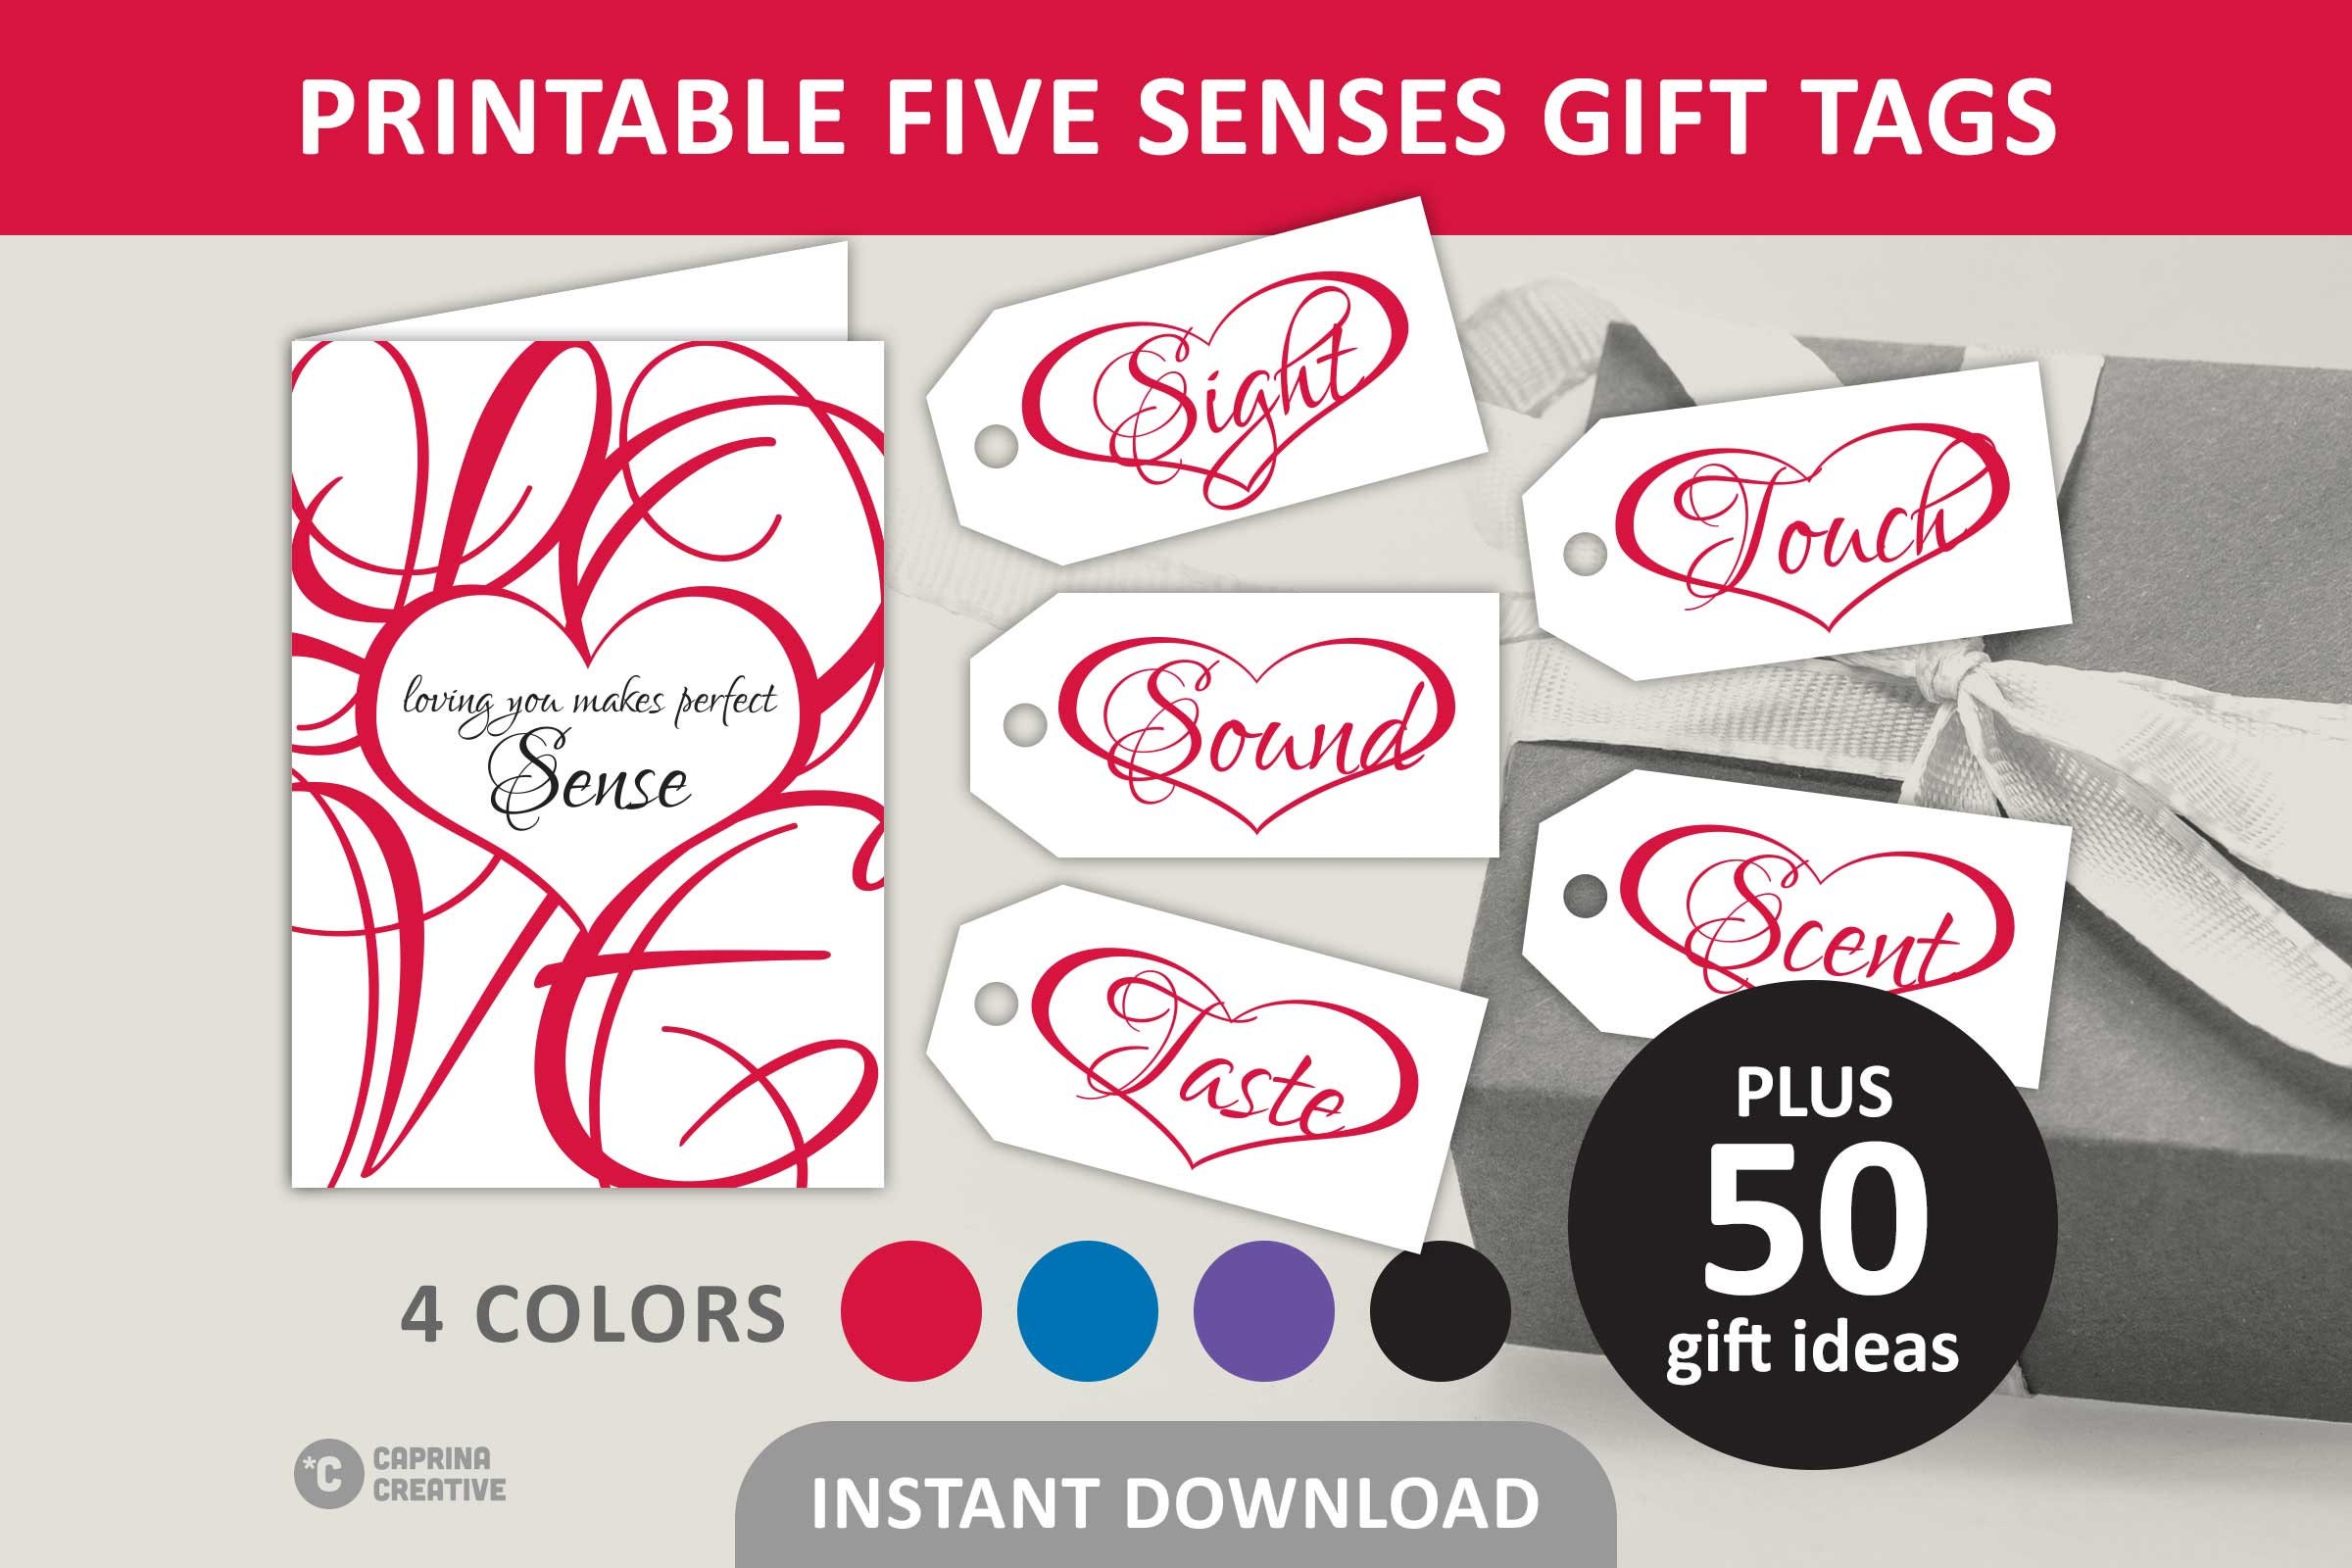 Five Senses Gift Tags & Card. Instant Download Printable. 5 Sense of Humor  Funny Print. Christmas Gift for Him Her. Valentines Day. Birthday 